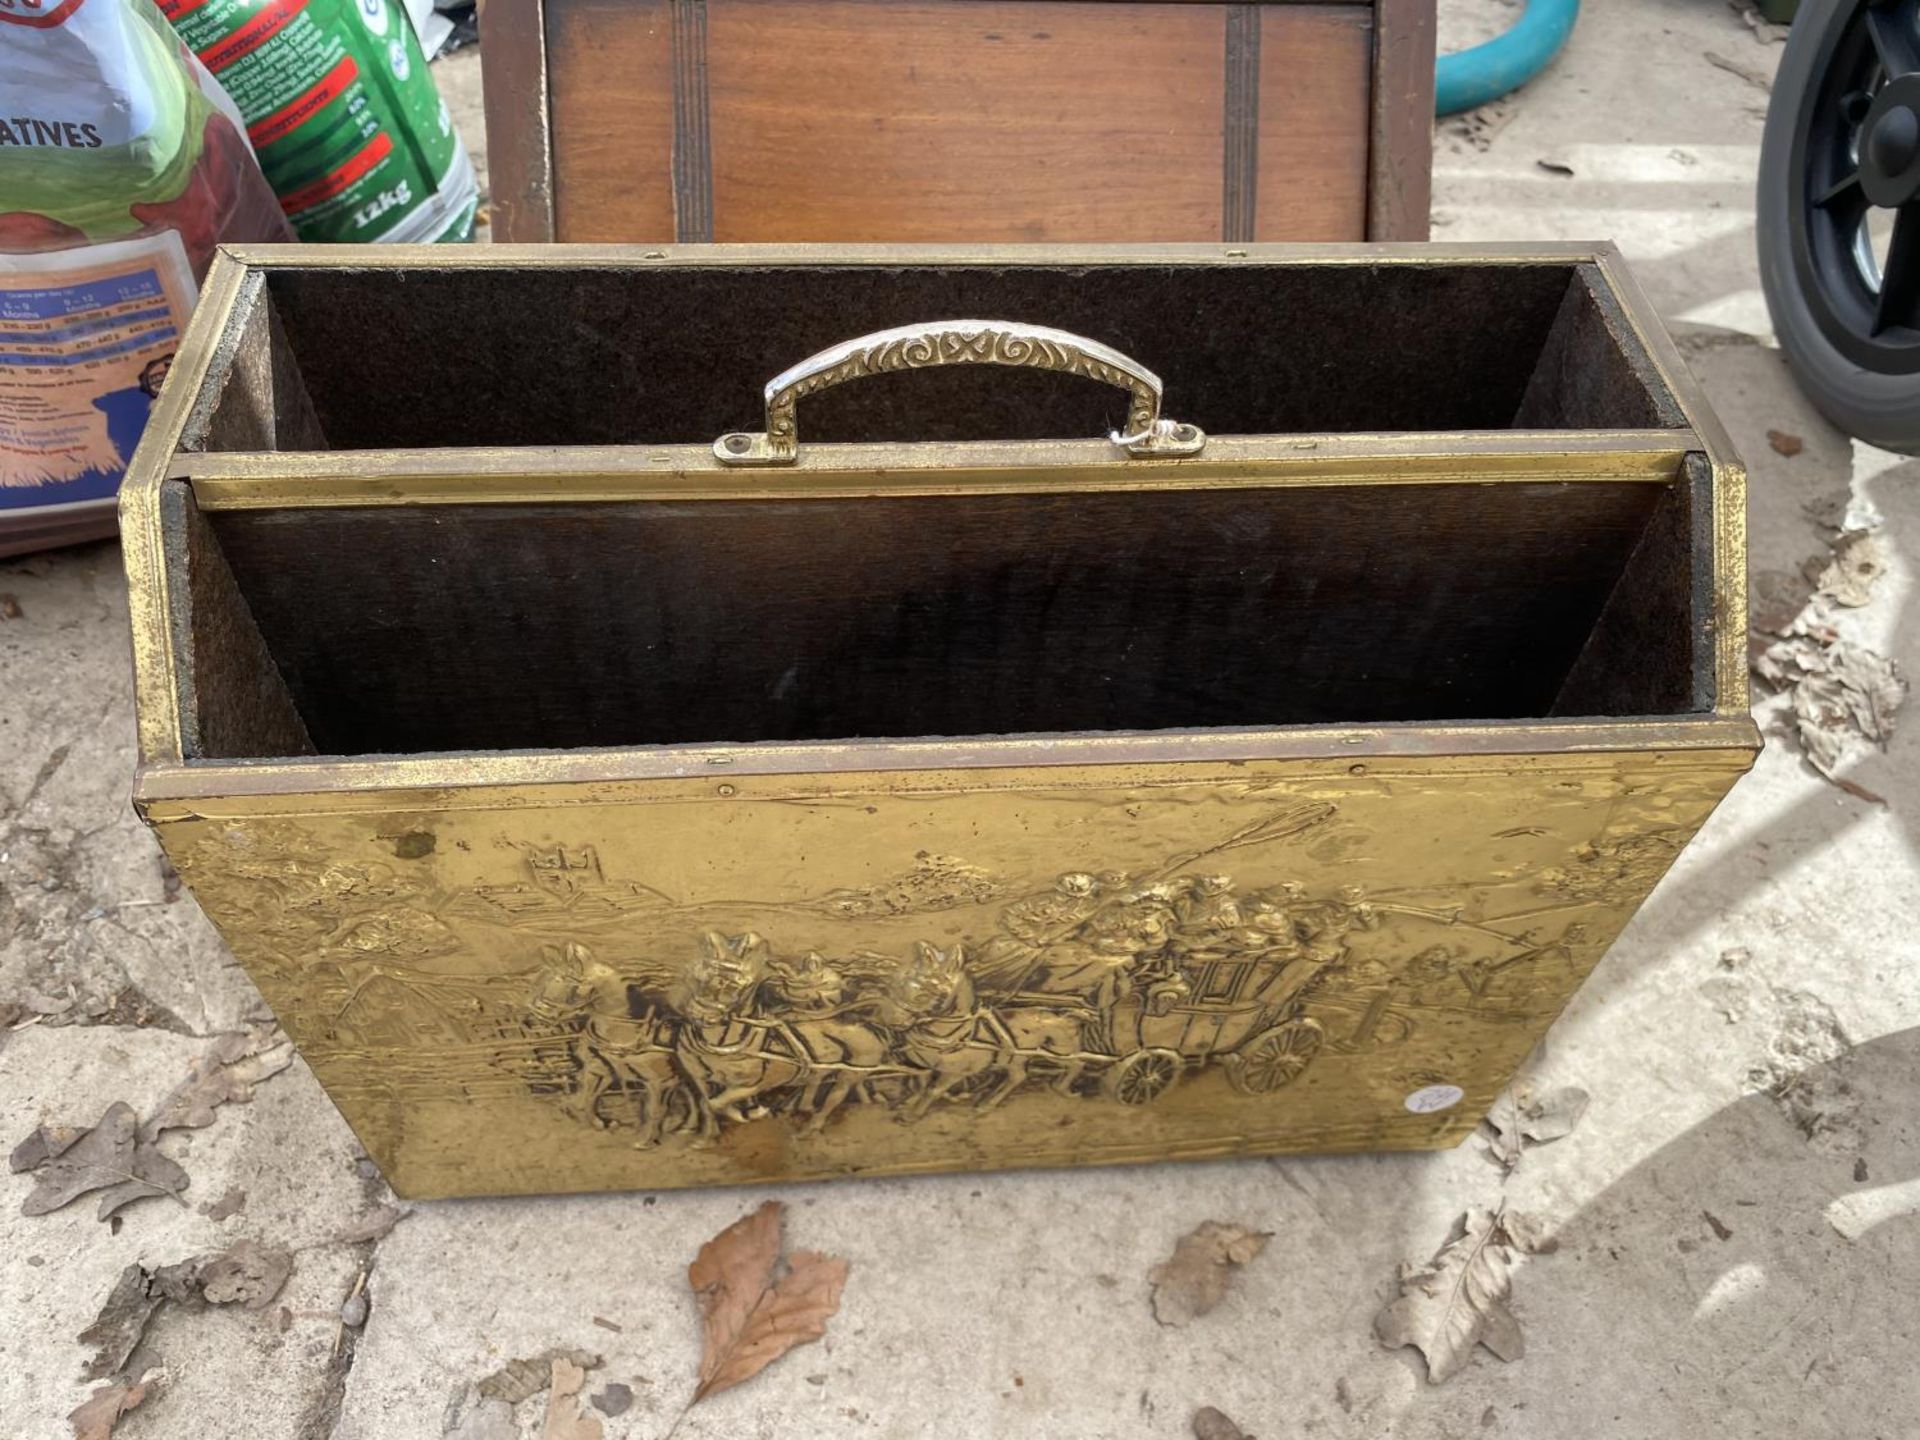 A WODDEN COAL BUCKET WITH METAL LINER AND A FURTHER DECORATIVE BRASS MAGAZINE RACK - Image 2 of 4